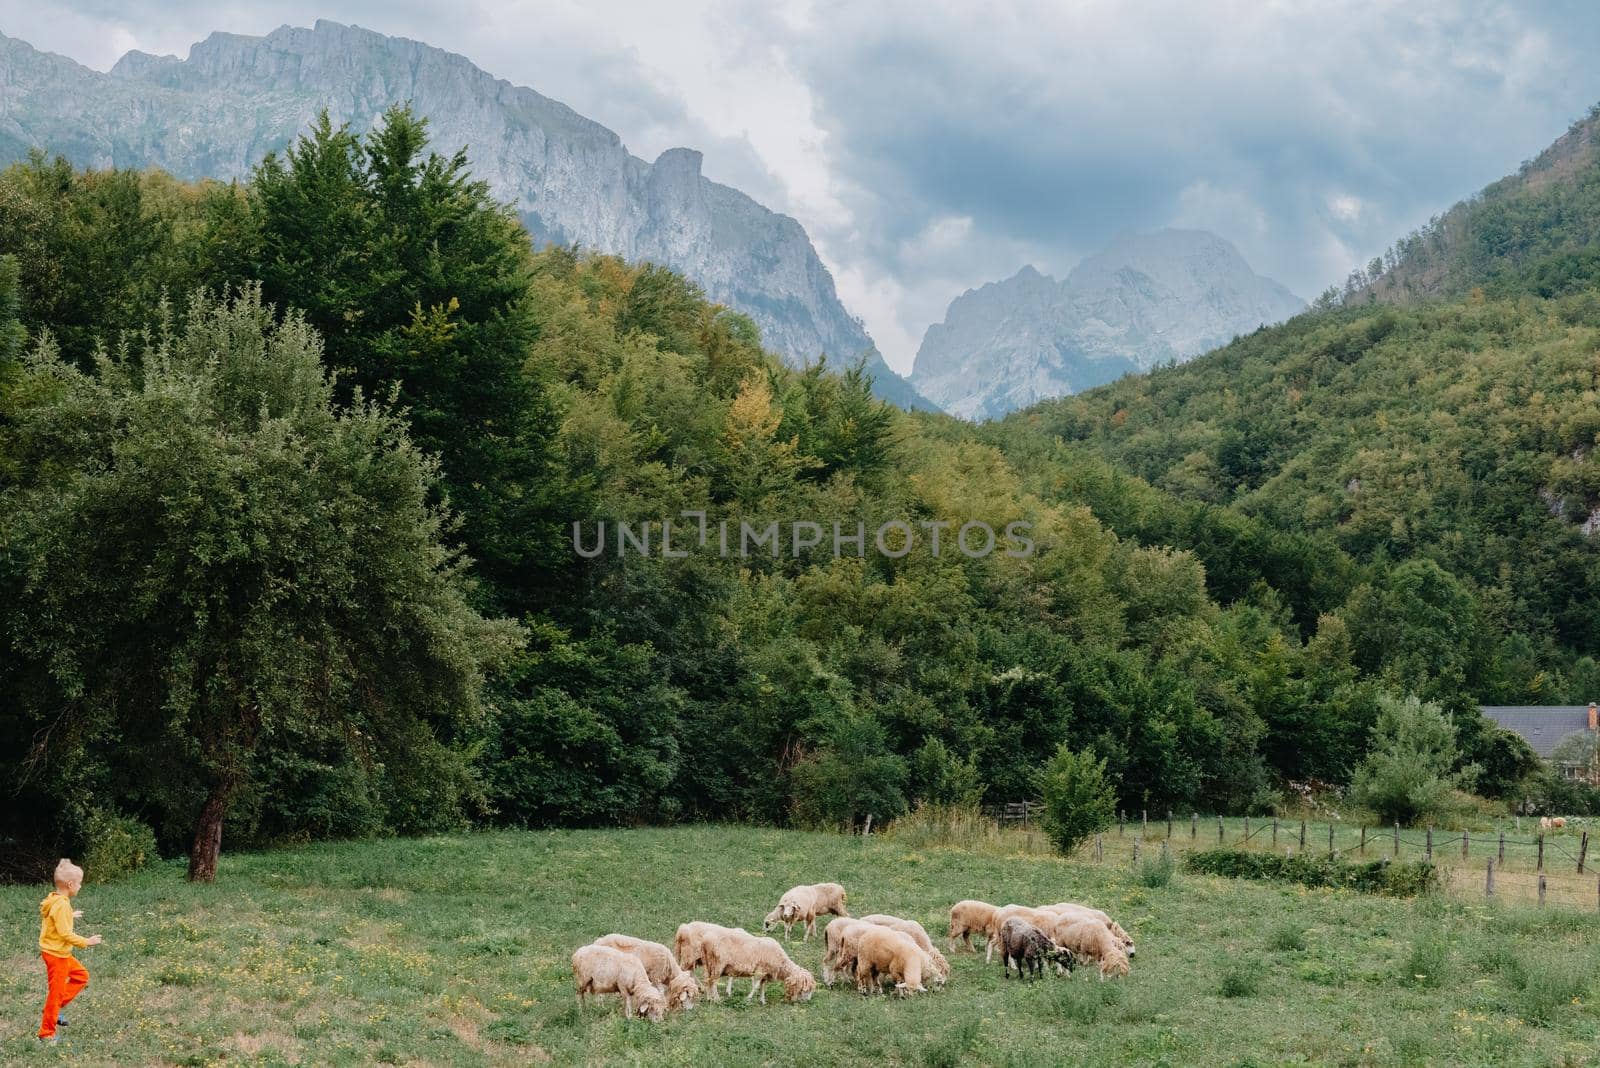 Cute little boy with a sheep on farm, best friends, boy and lamb against the backdrop of greenery, greenery background a small shepherd and his sheep, poddy and child on the grass. Little boy herding sheep in the mountains. Little kid and sheeps in mountains, childs travel learn animals.